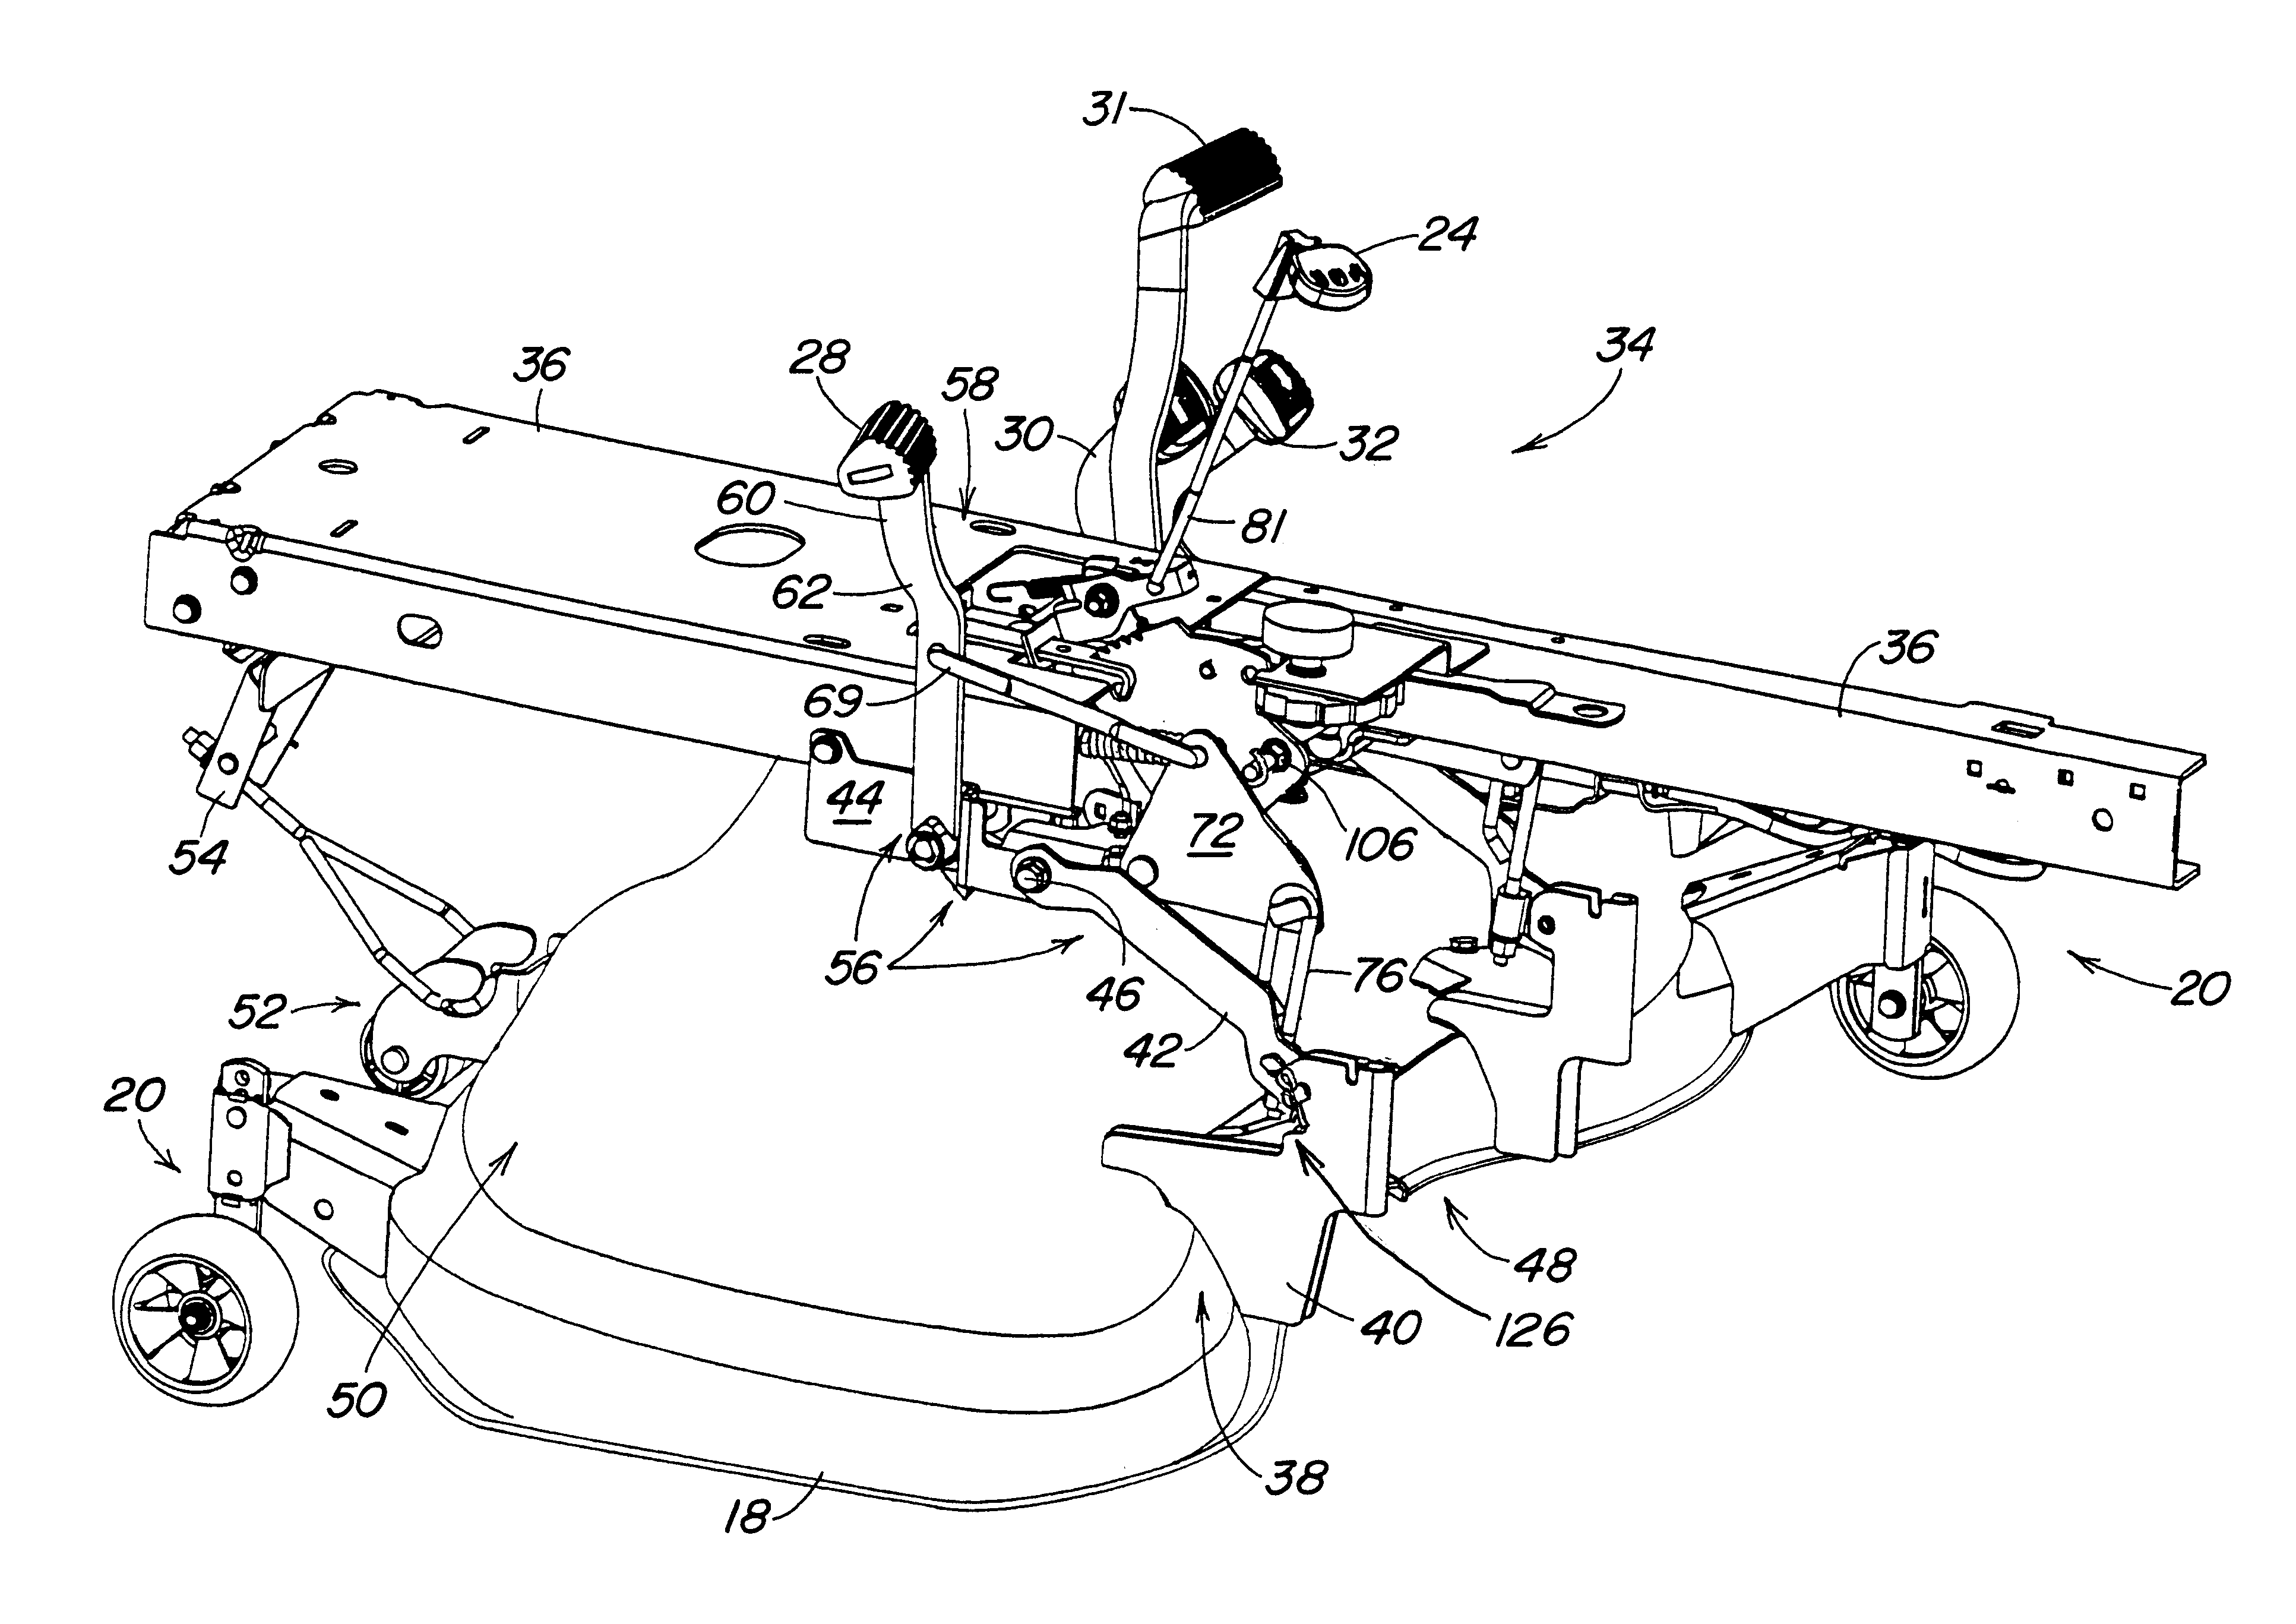 Pedal actuated height adjustment mechanism for a mower cutting deck